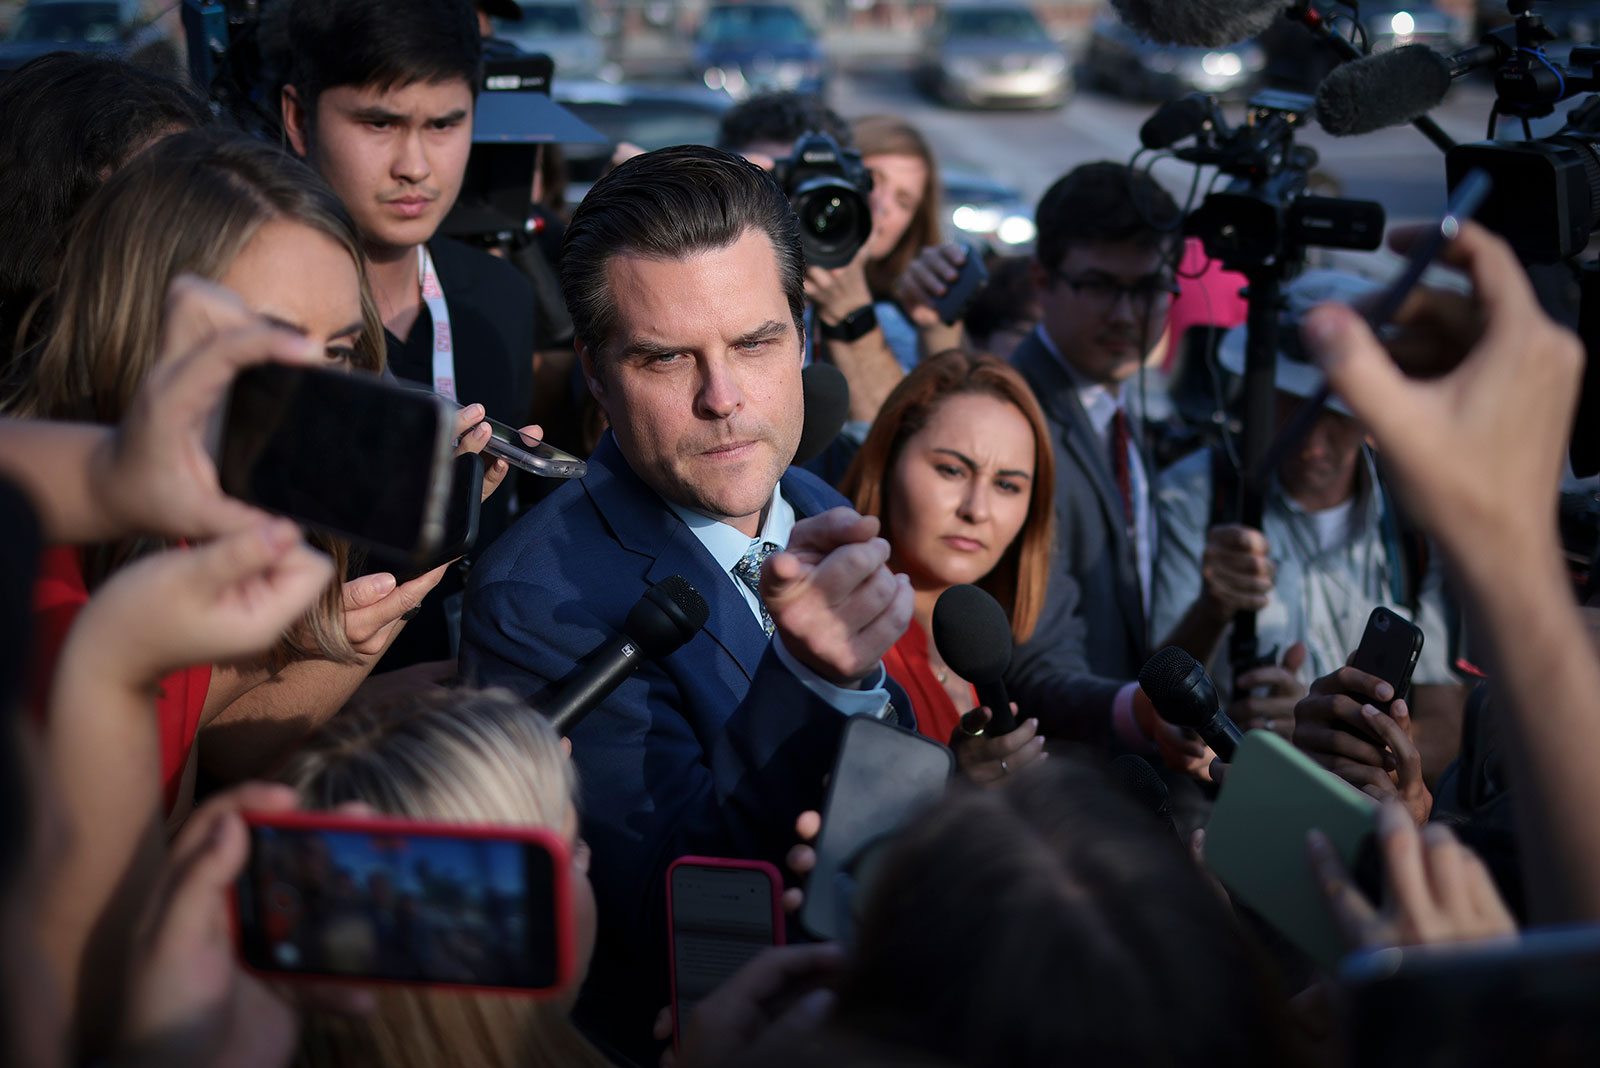 Rep. Matt Gaetz answers questions outside the US Capitol after successfully leading a vote to remove Rep. Kevin McCarthy from the office of Speaker of the House on Tuesday, October 3, 2023.